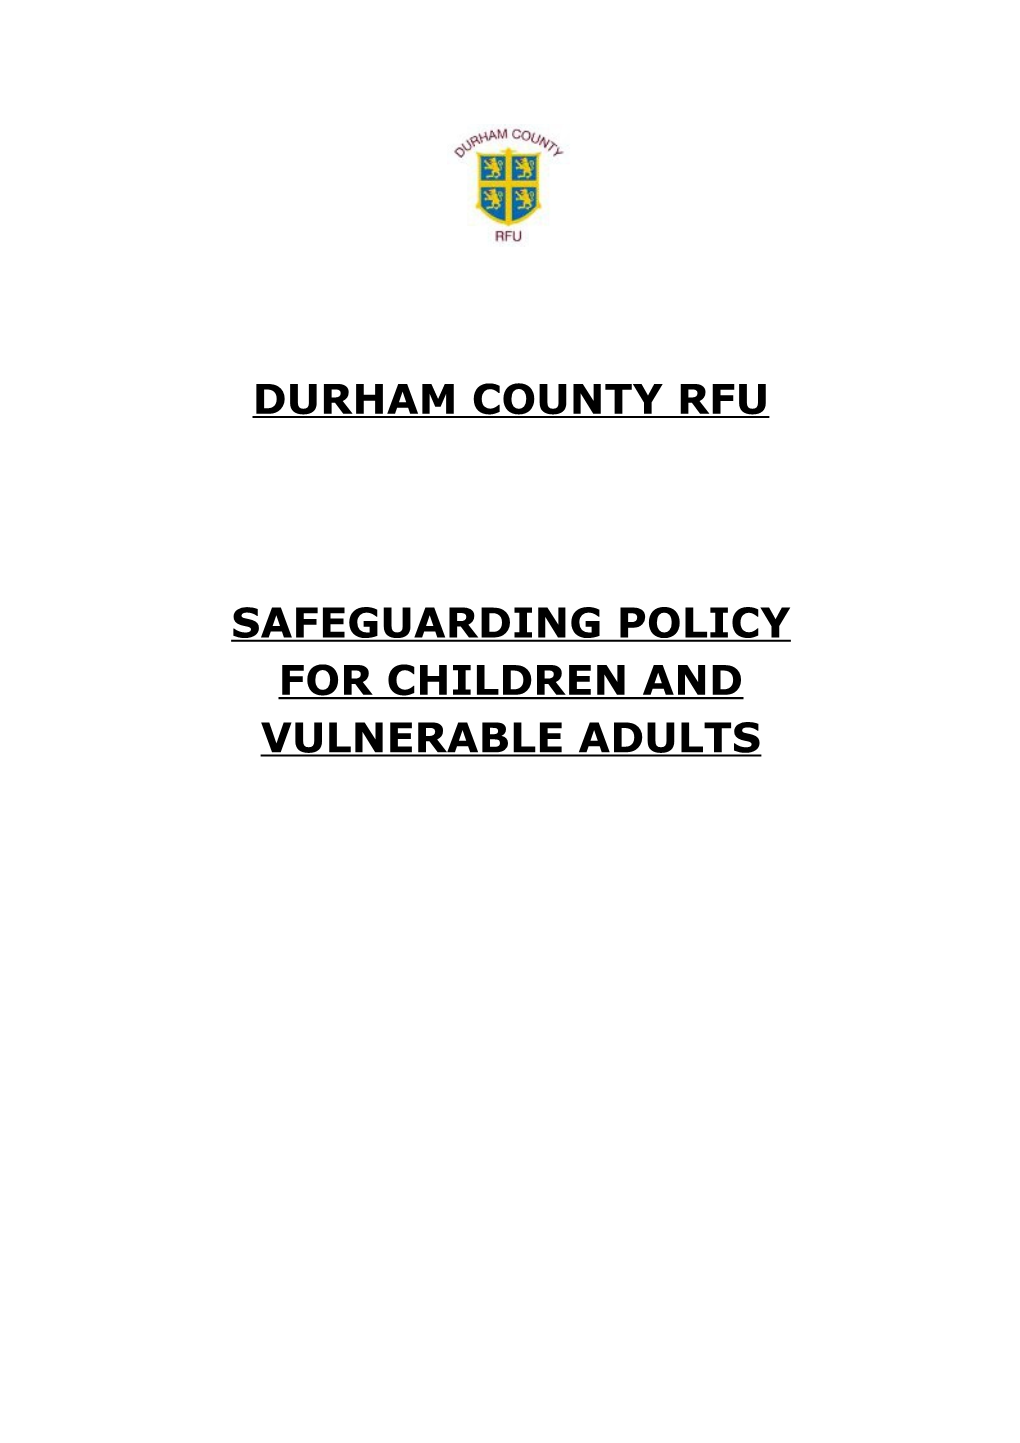 For Children and Vulnerable Adults